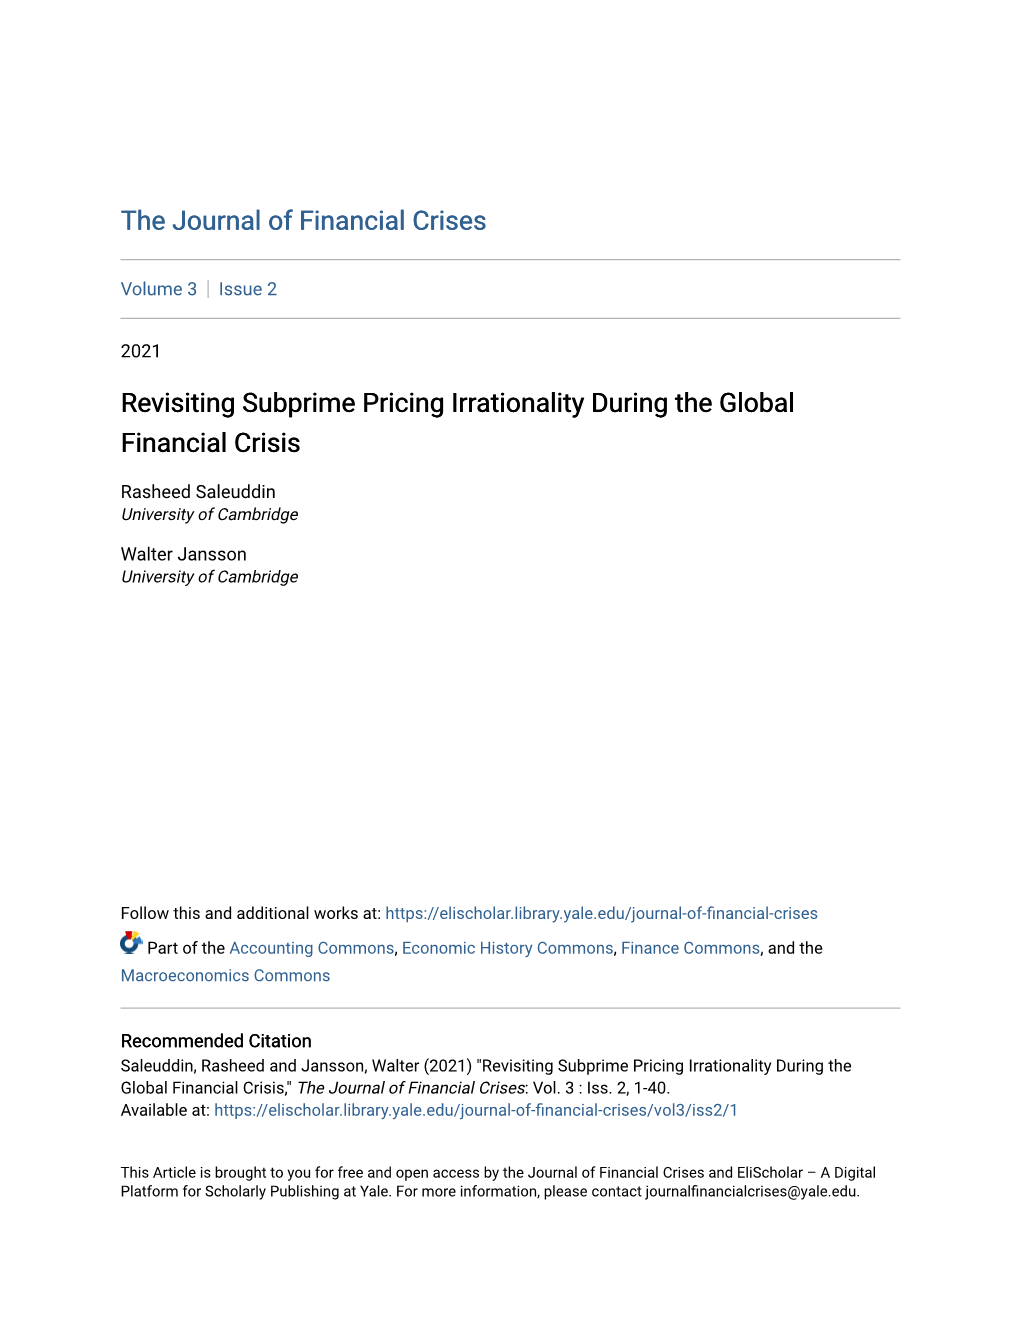 Revisiting Subprime Pricing Irrationality During the Global Financial Crisis